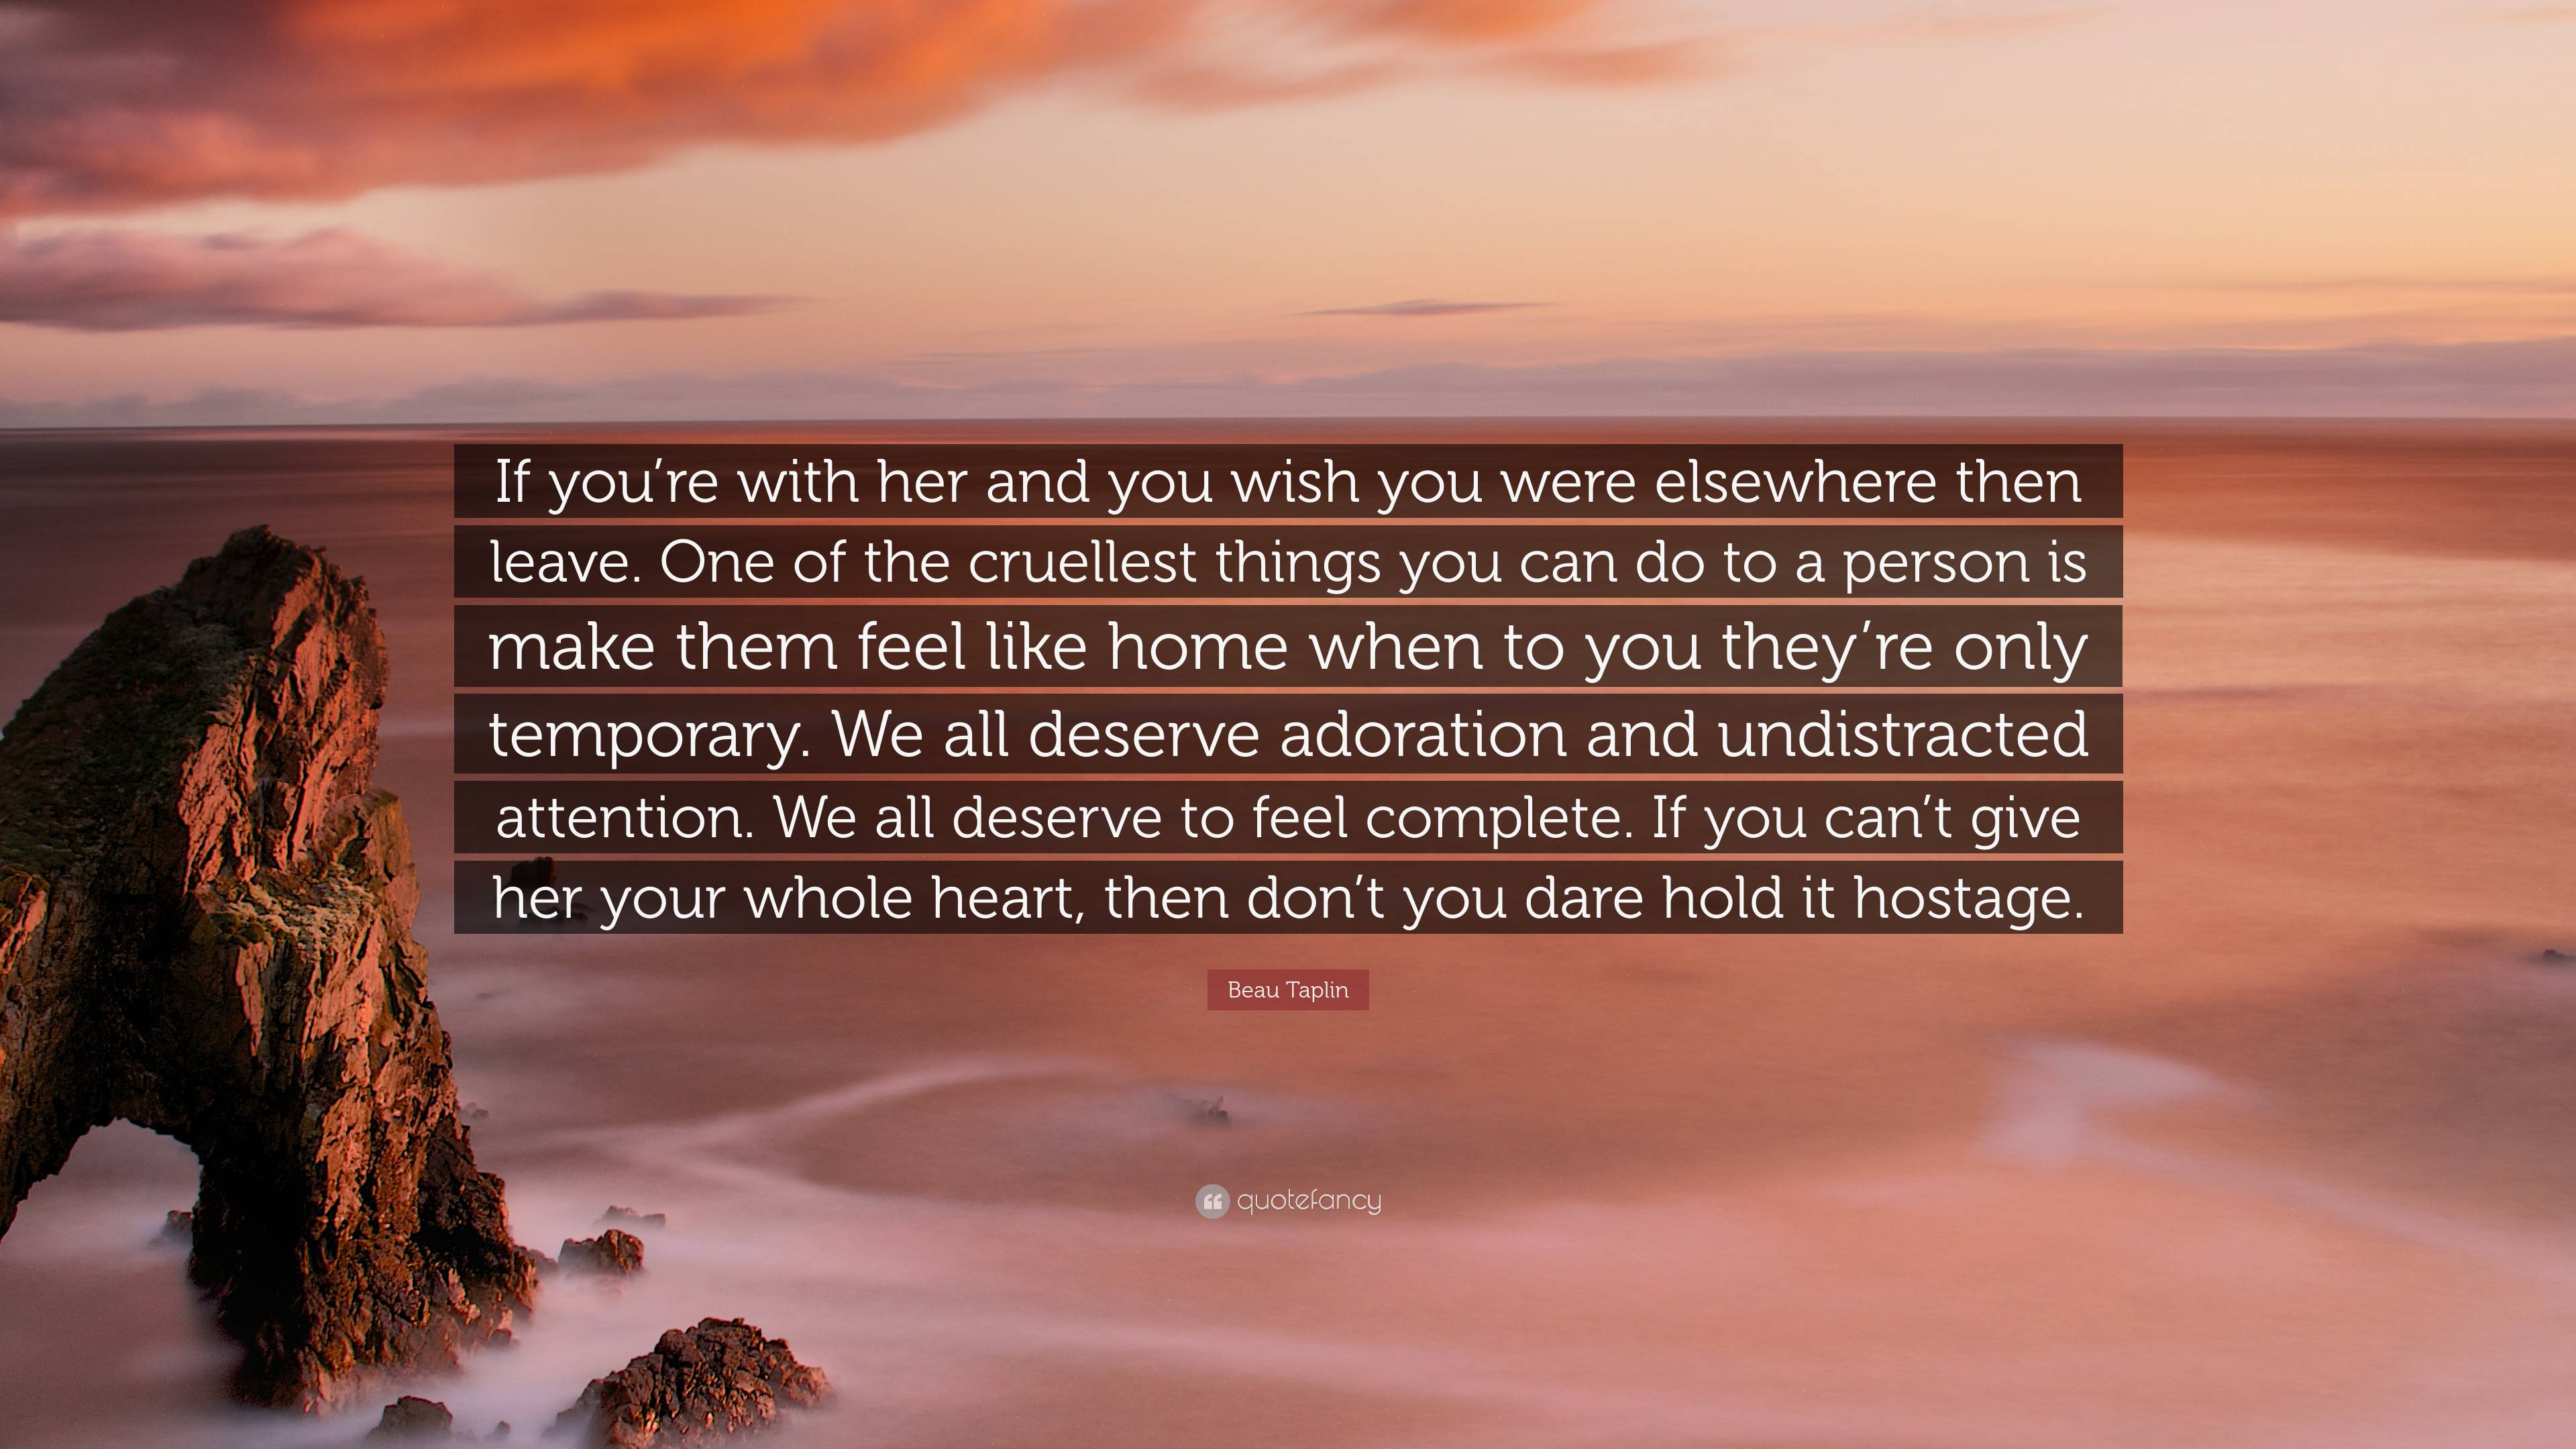 Beau Taplin Quote: “If you’re with her and you wish you were elsewhere ...